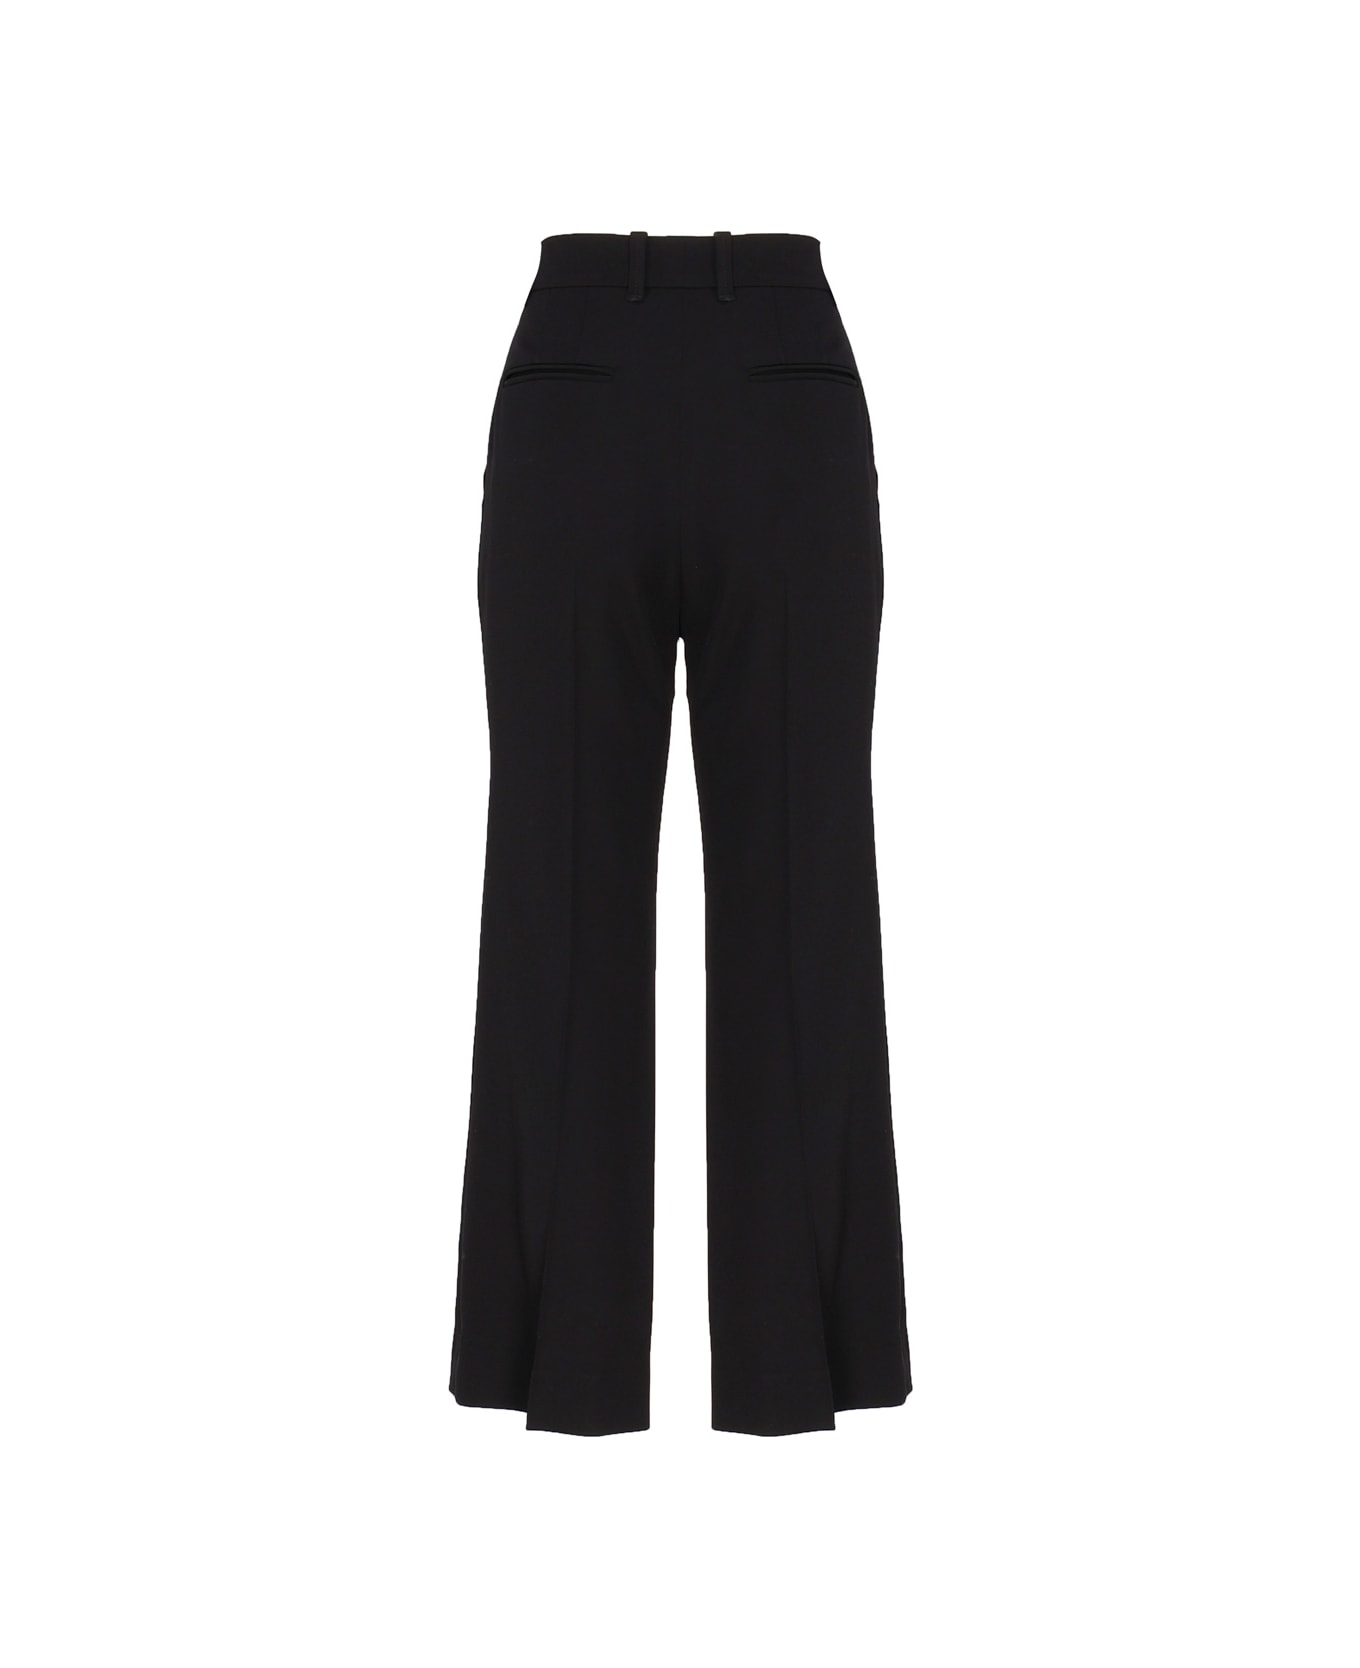 Chloé Tailored Trousers - Black